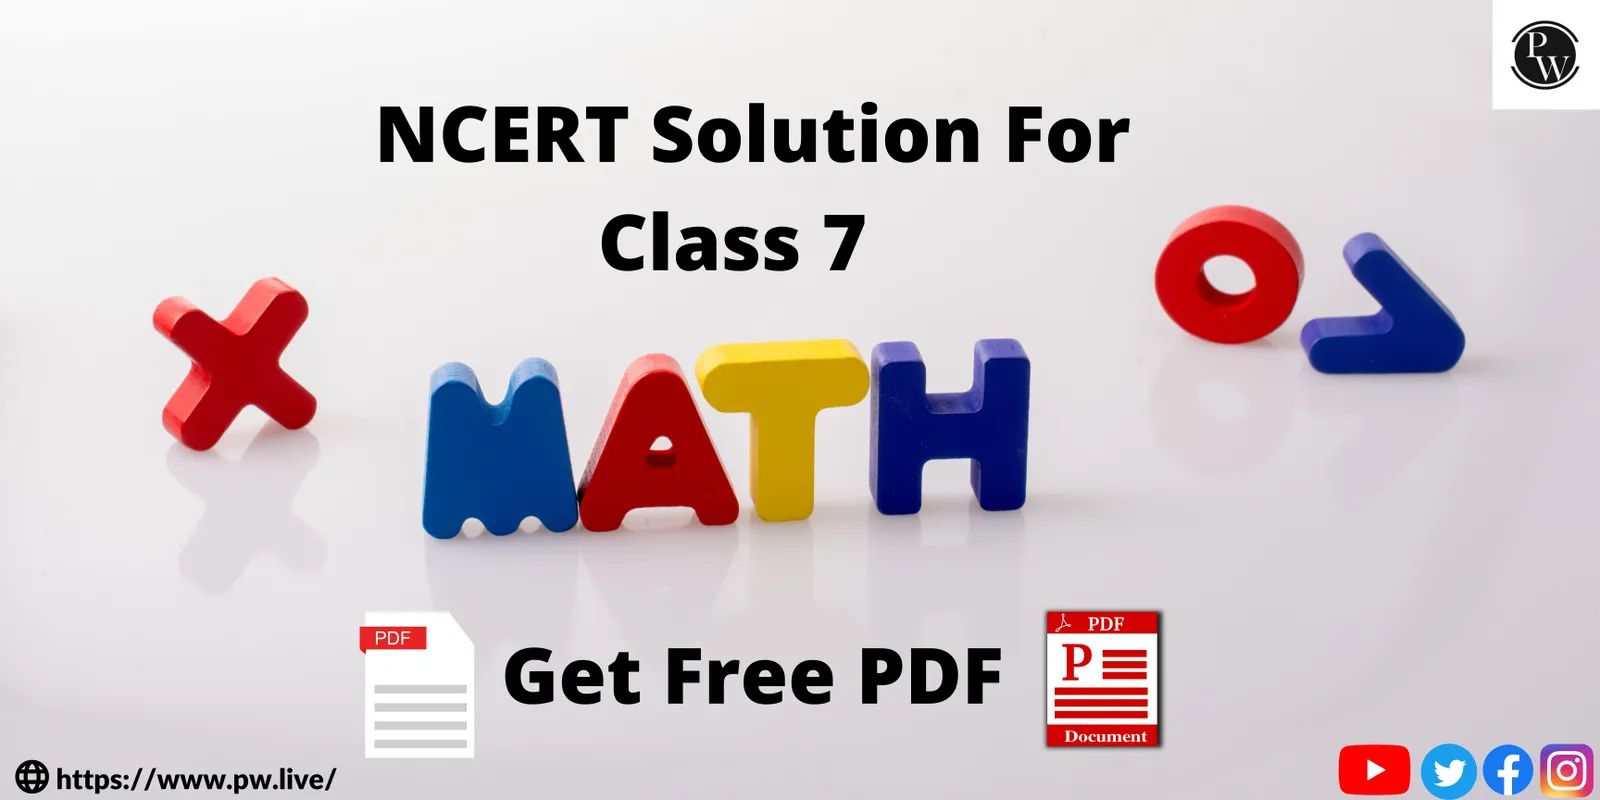 NCERT Solutions for Class 7 All Subjects  PDF Links